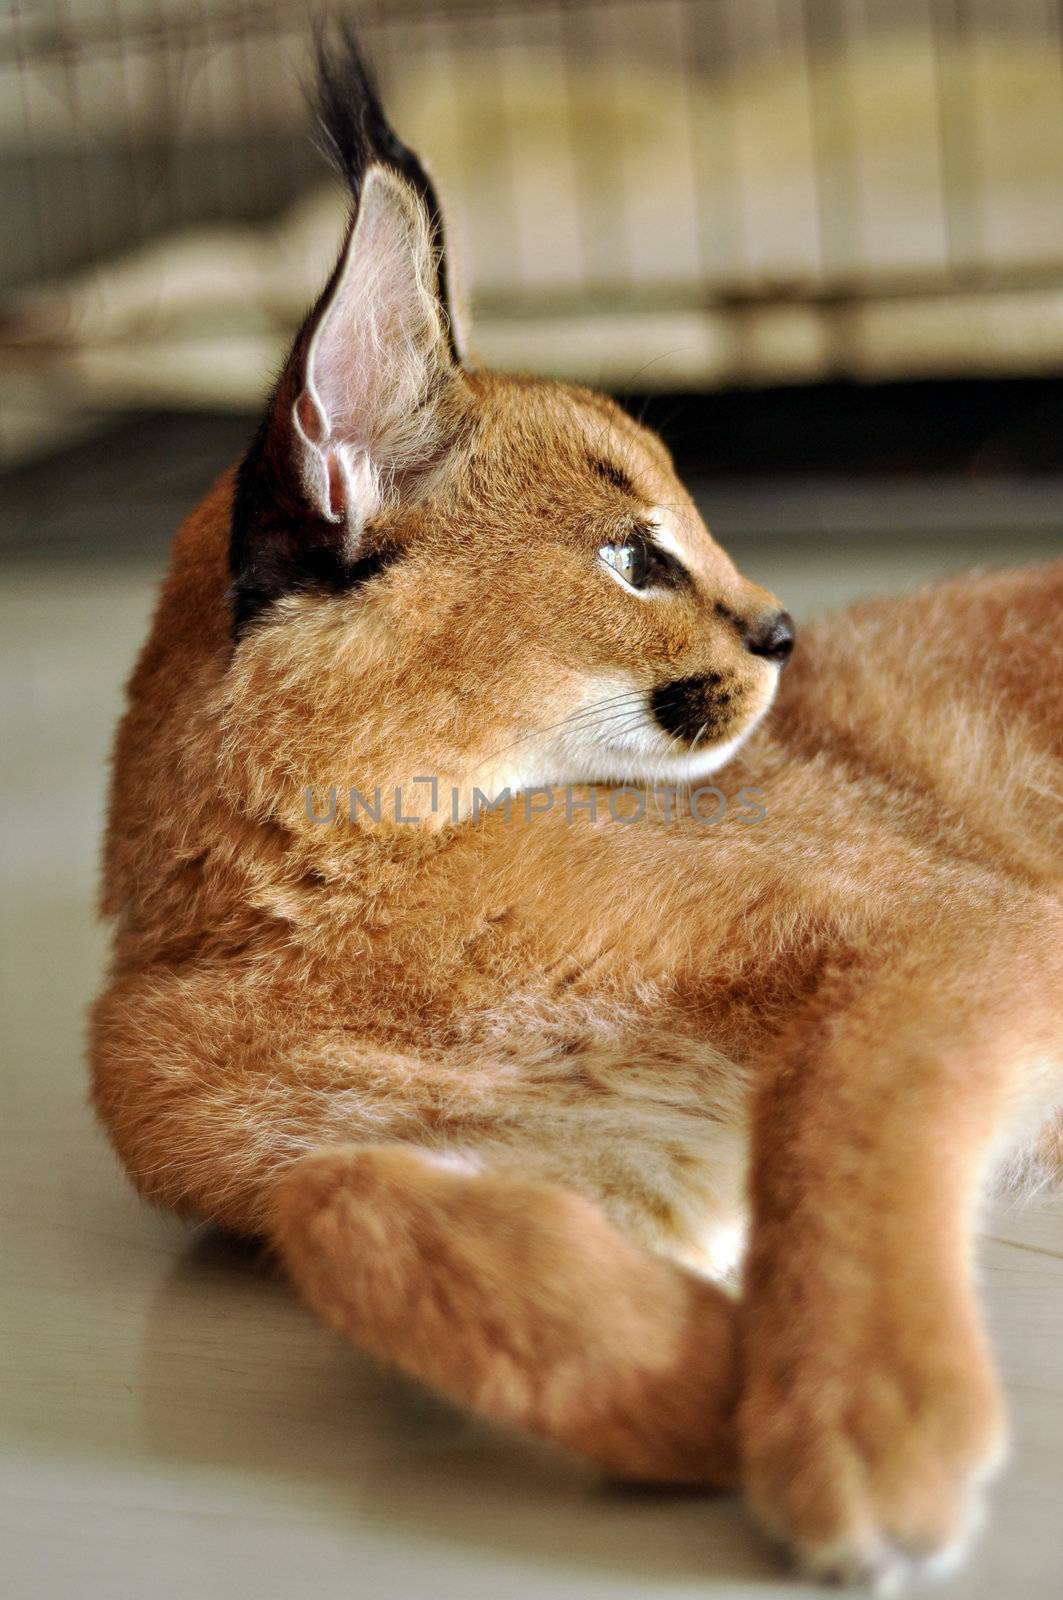 The caracal is a fiercely territorial medium-sized cat ranging over Western Asia, South Asia and Africa.